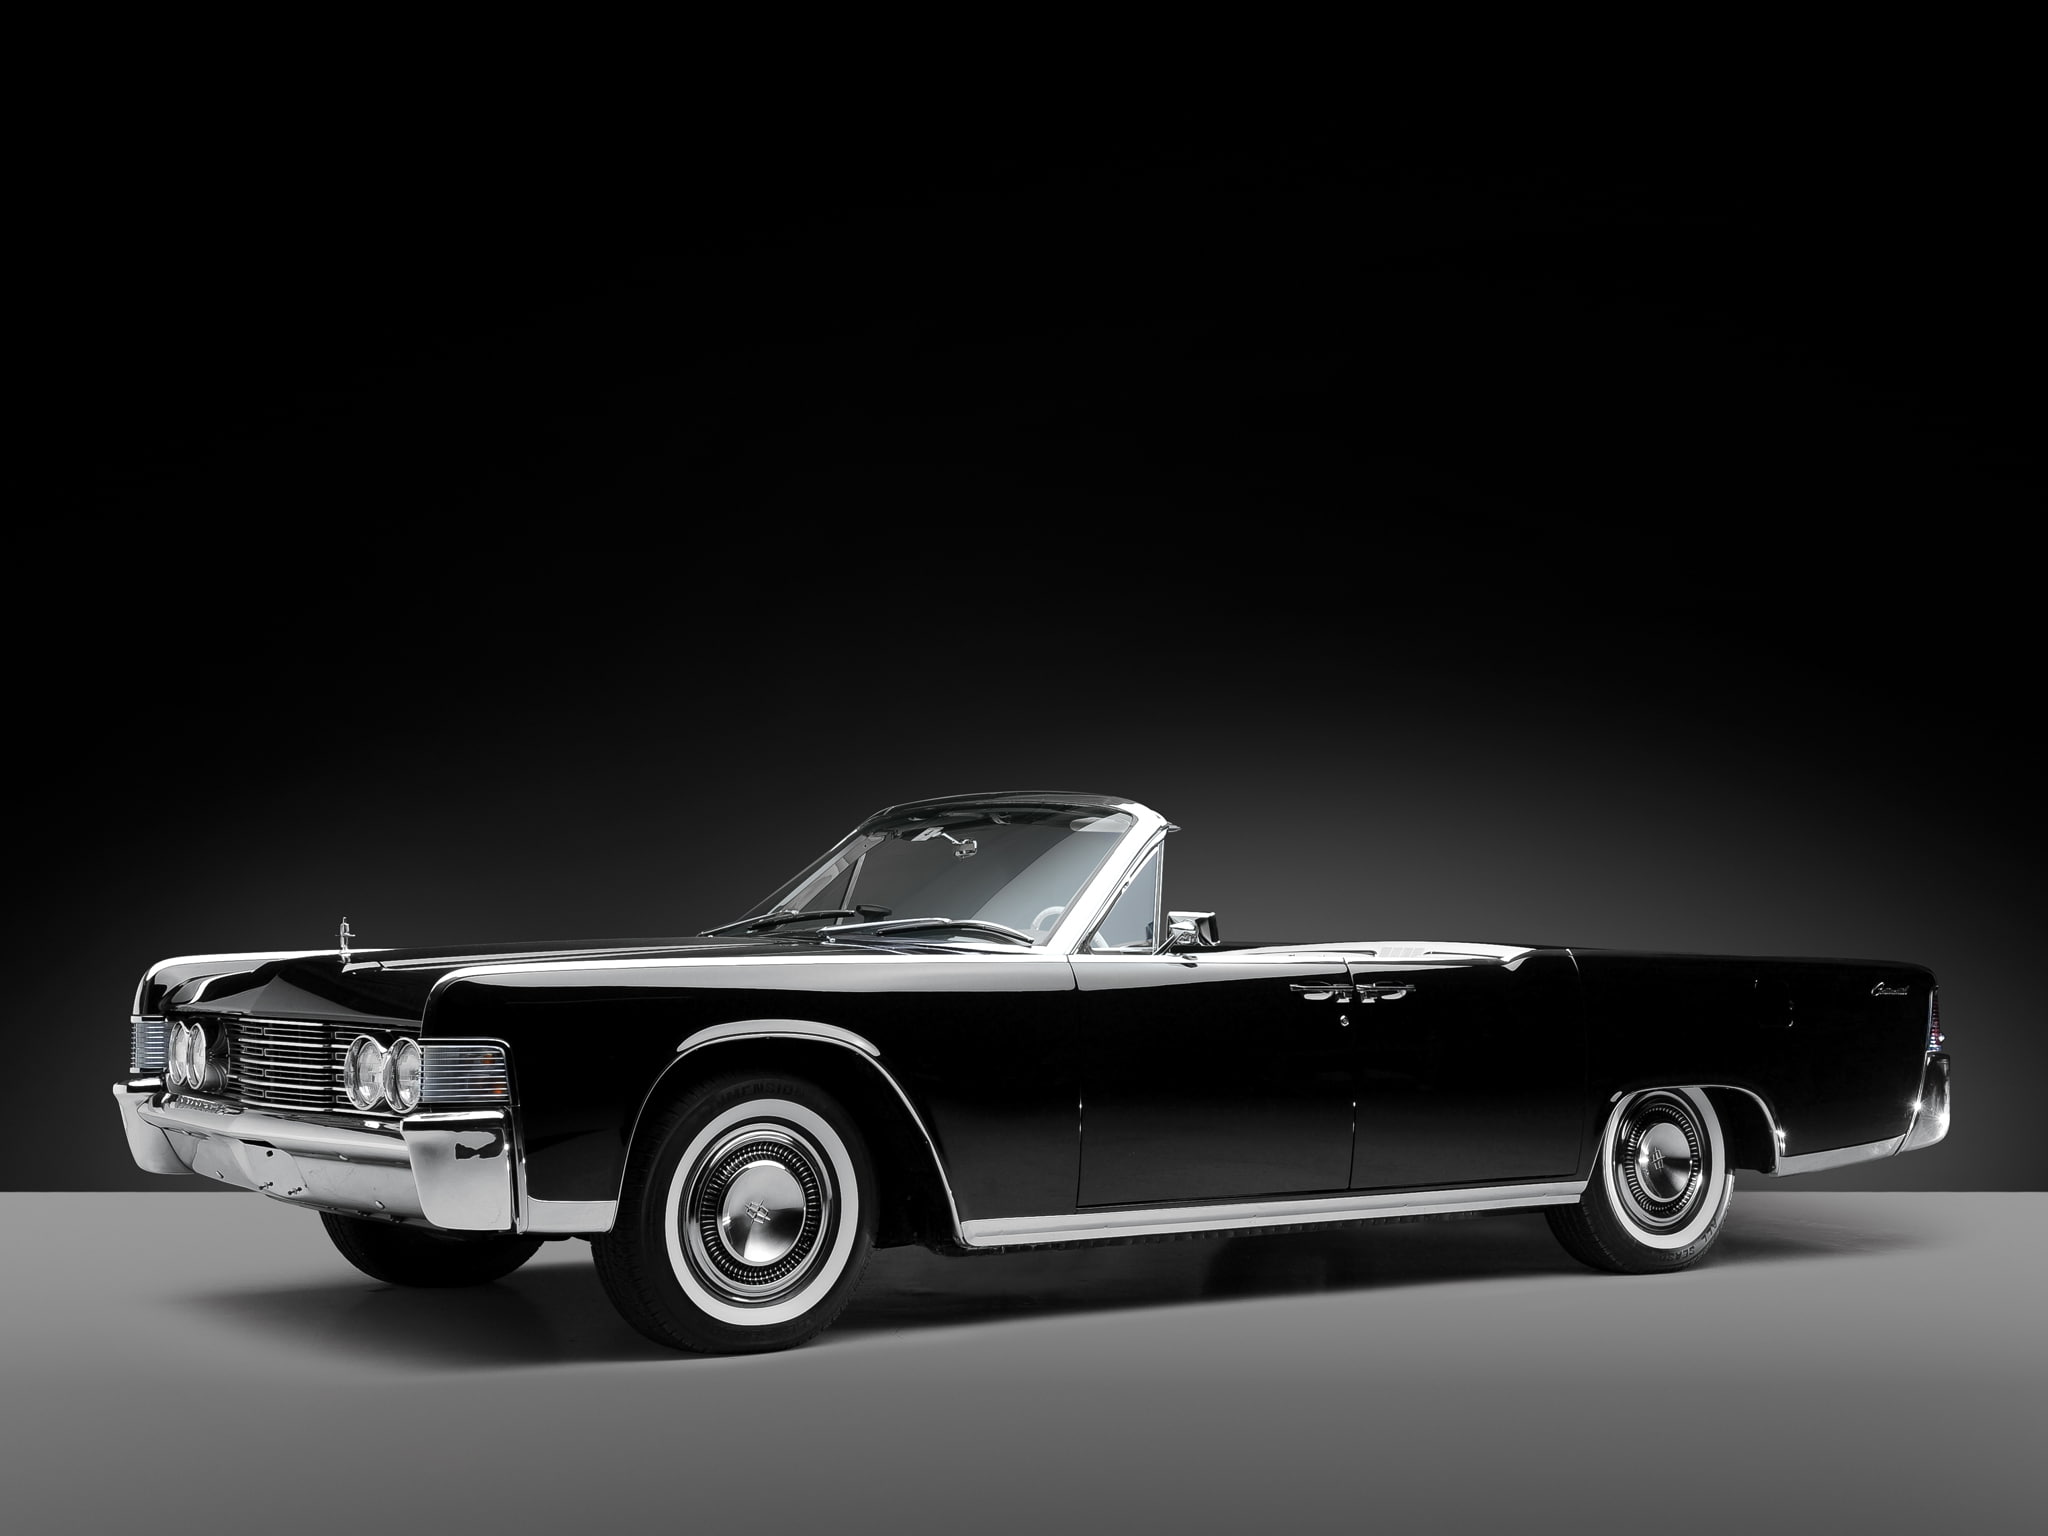 1965, classic, continental, convertible, lincoln, luxury